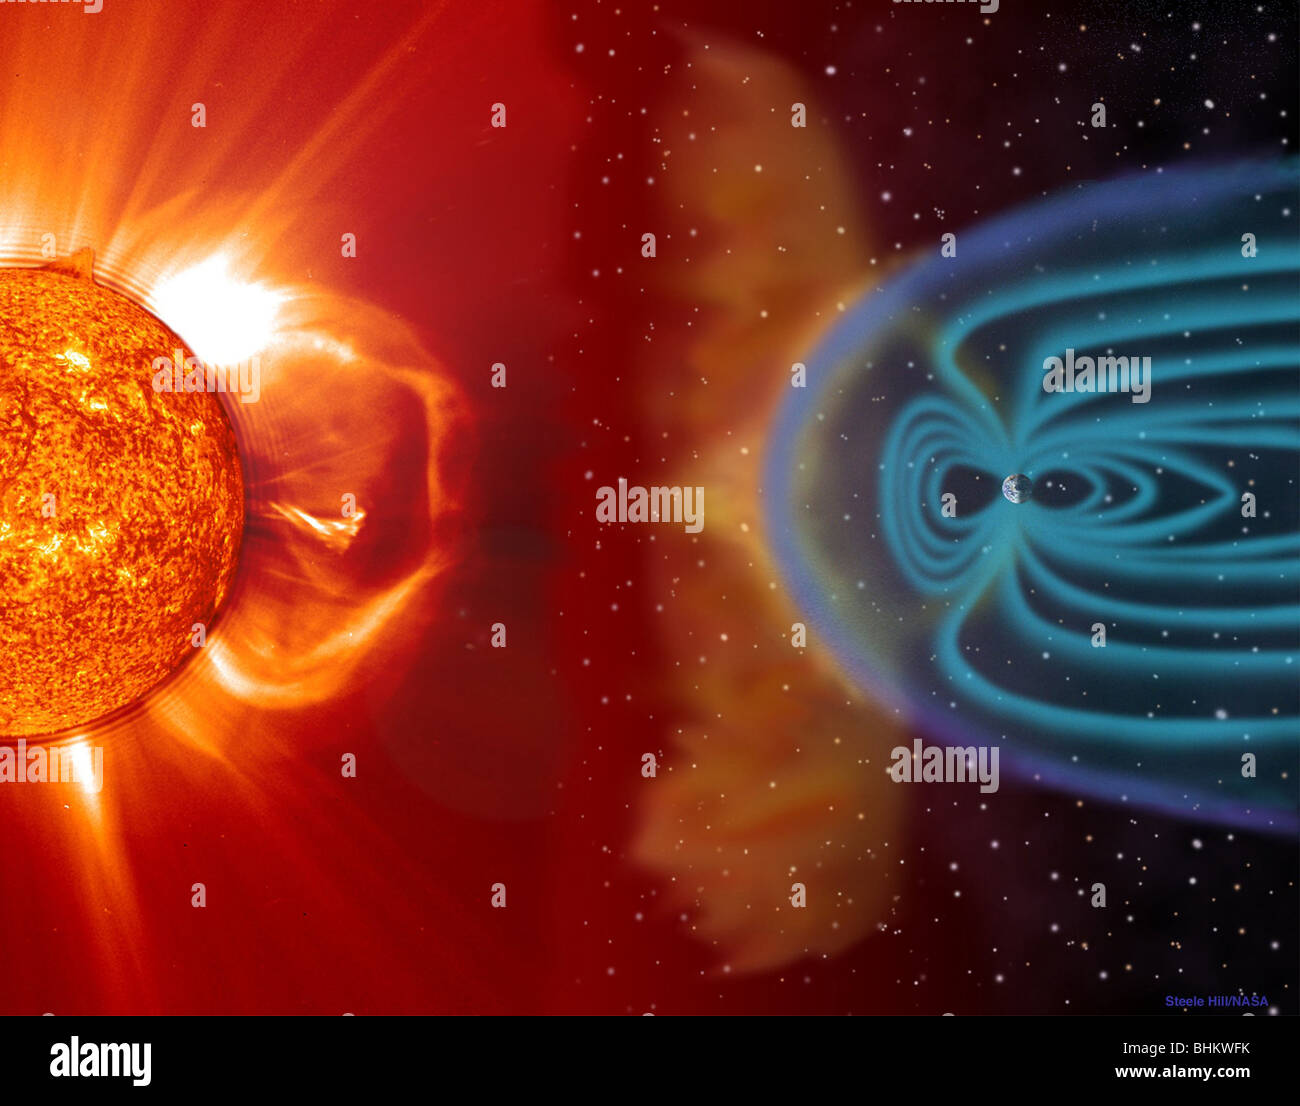 The Sun’s magnetic field and releases of plasma directly affect Earth and the rest of the solar system. Artist's illustration Stock Photo